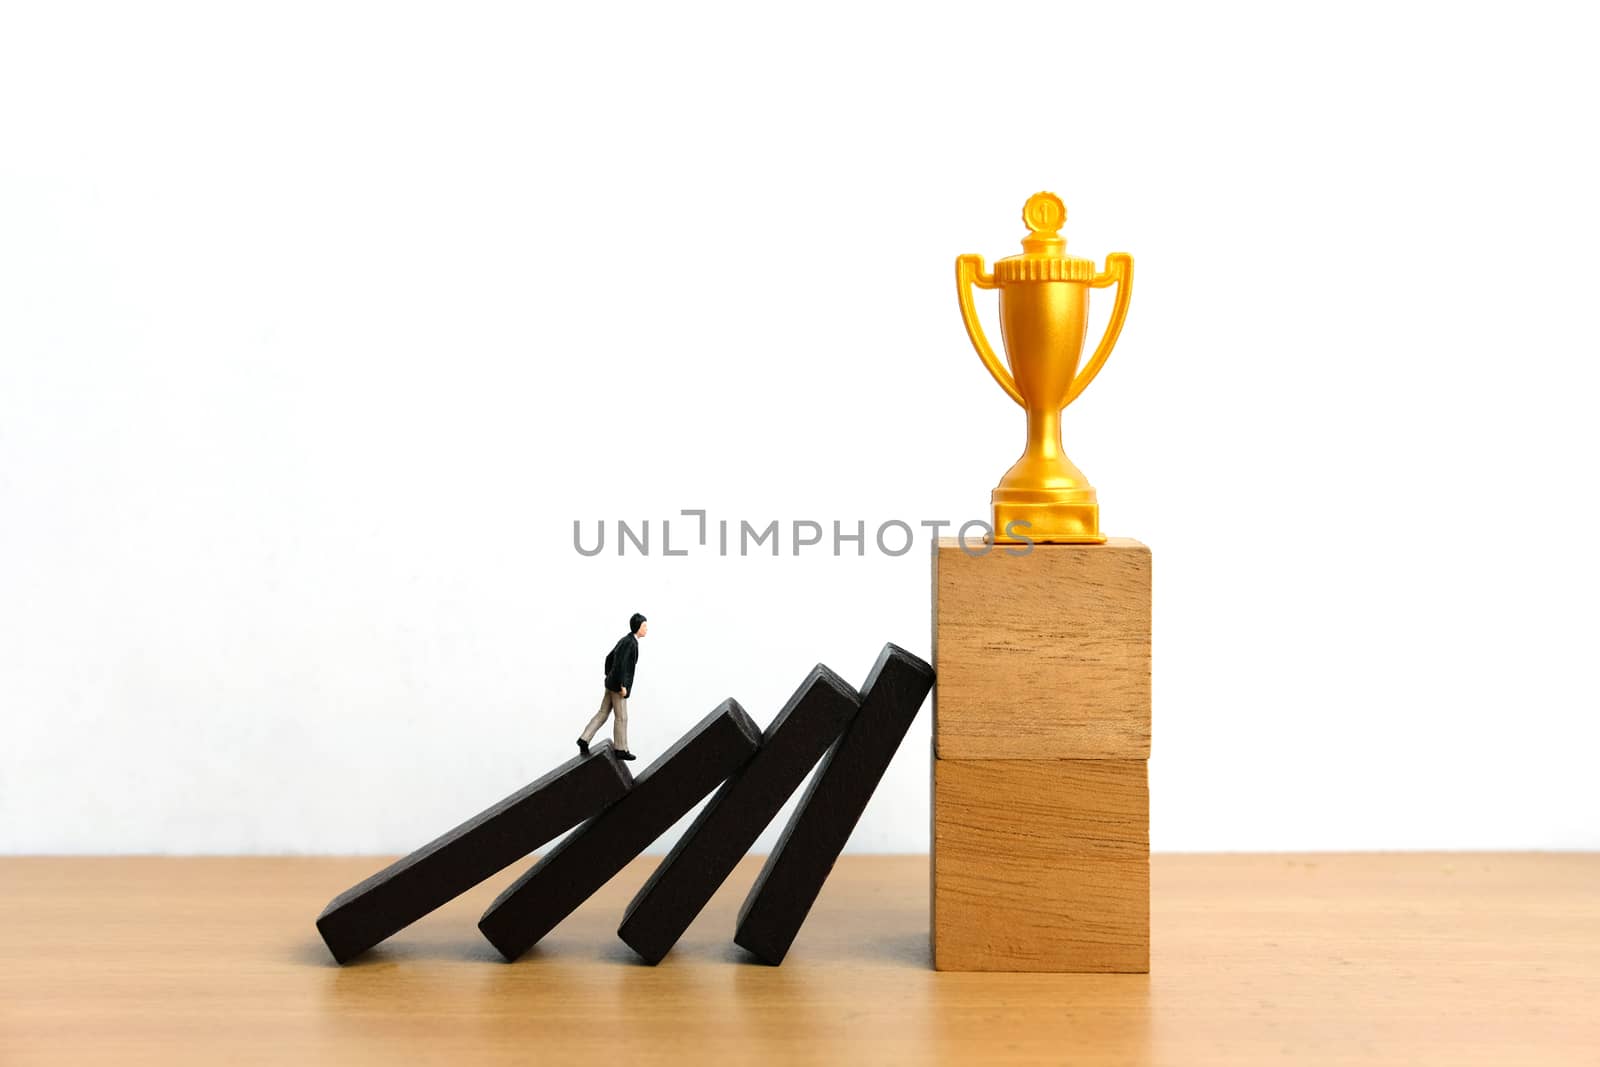 Miniature business concept - businessman walking on collapse stairway to reach golden trophy